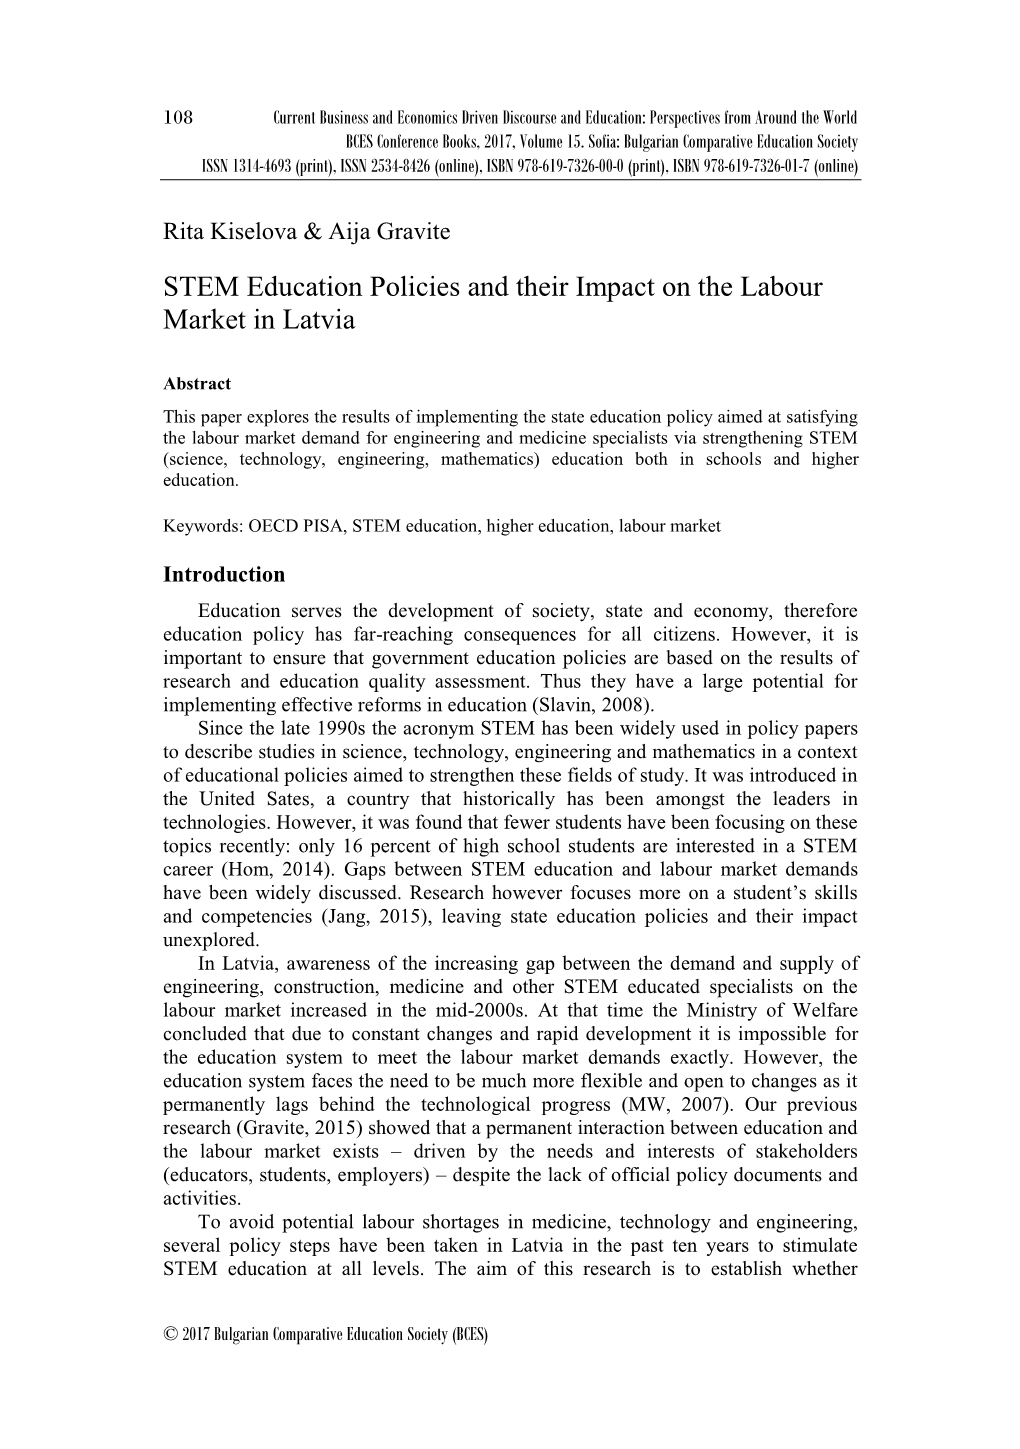 STEM Education Policies and Their Impact on the Labour Market in Latvia